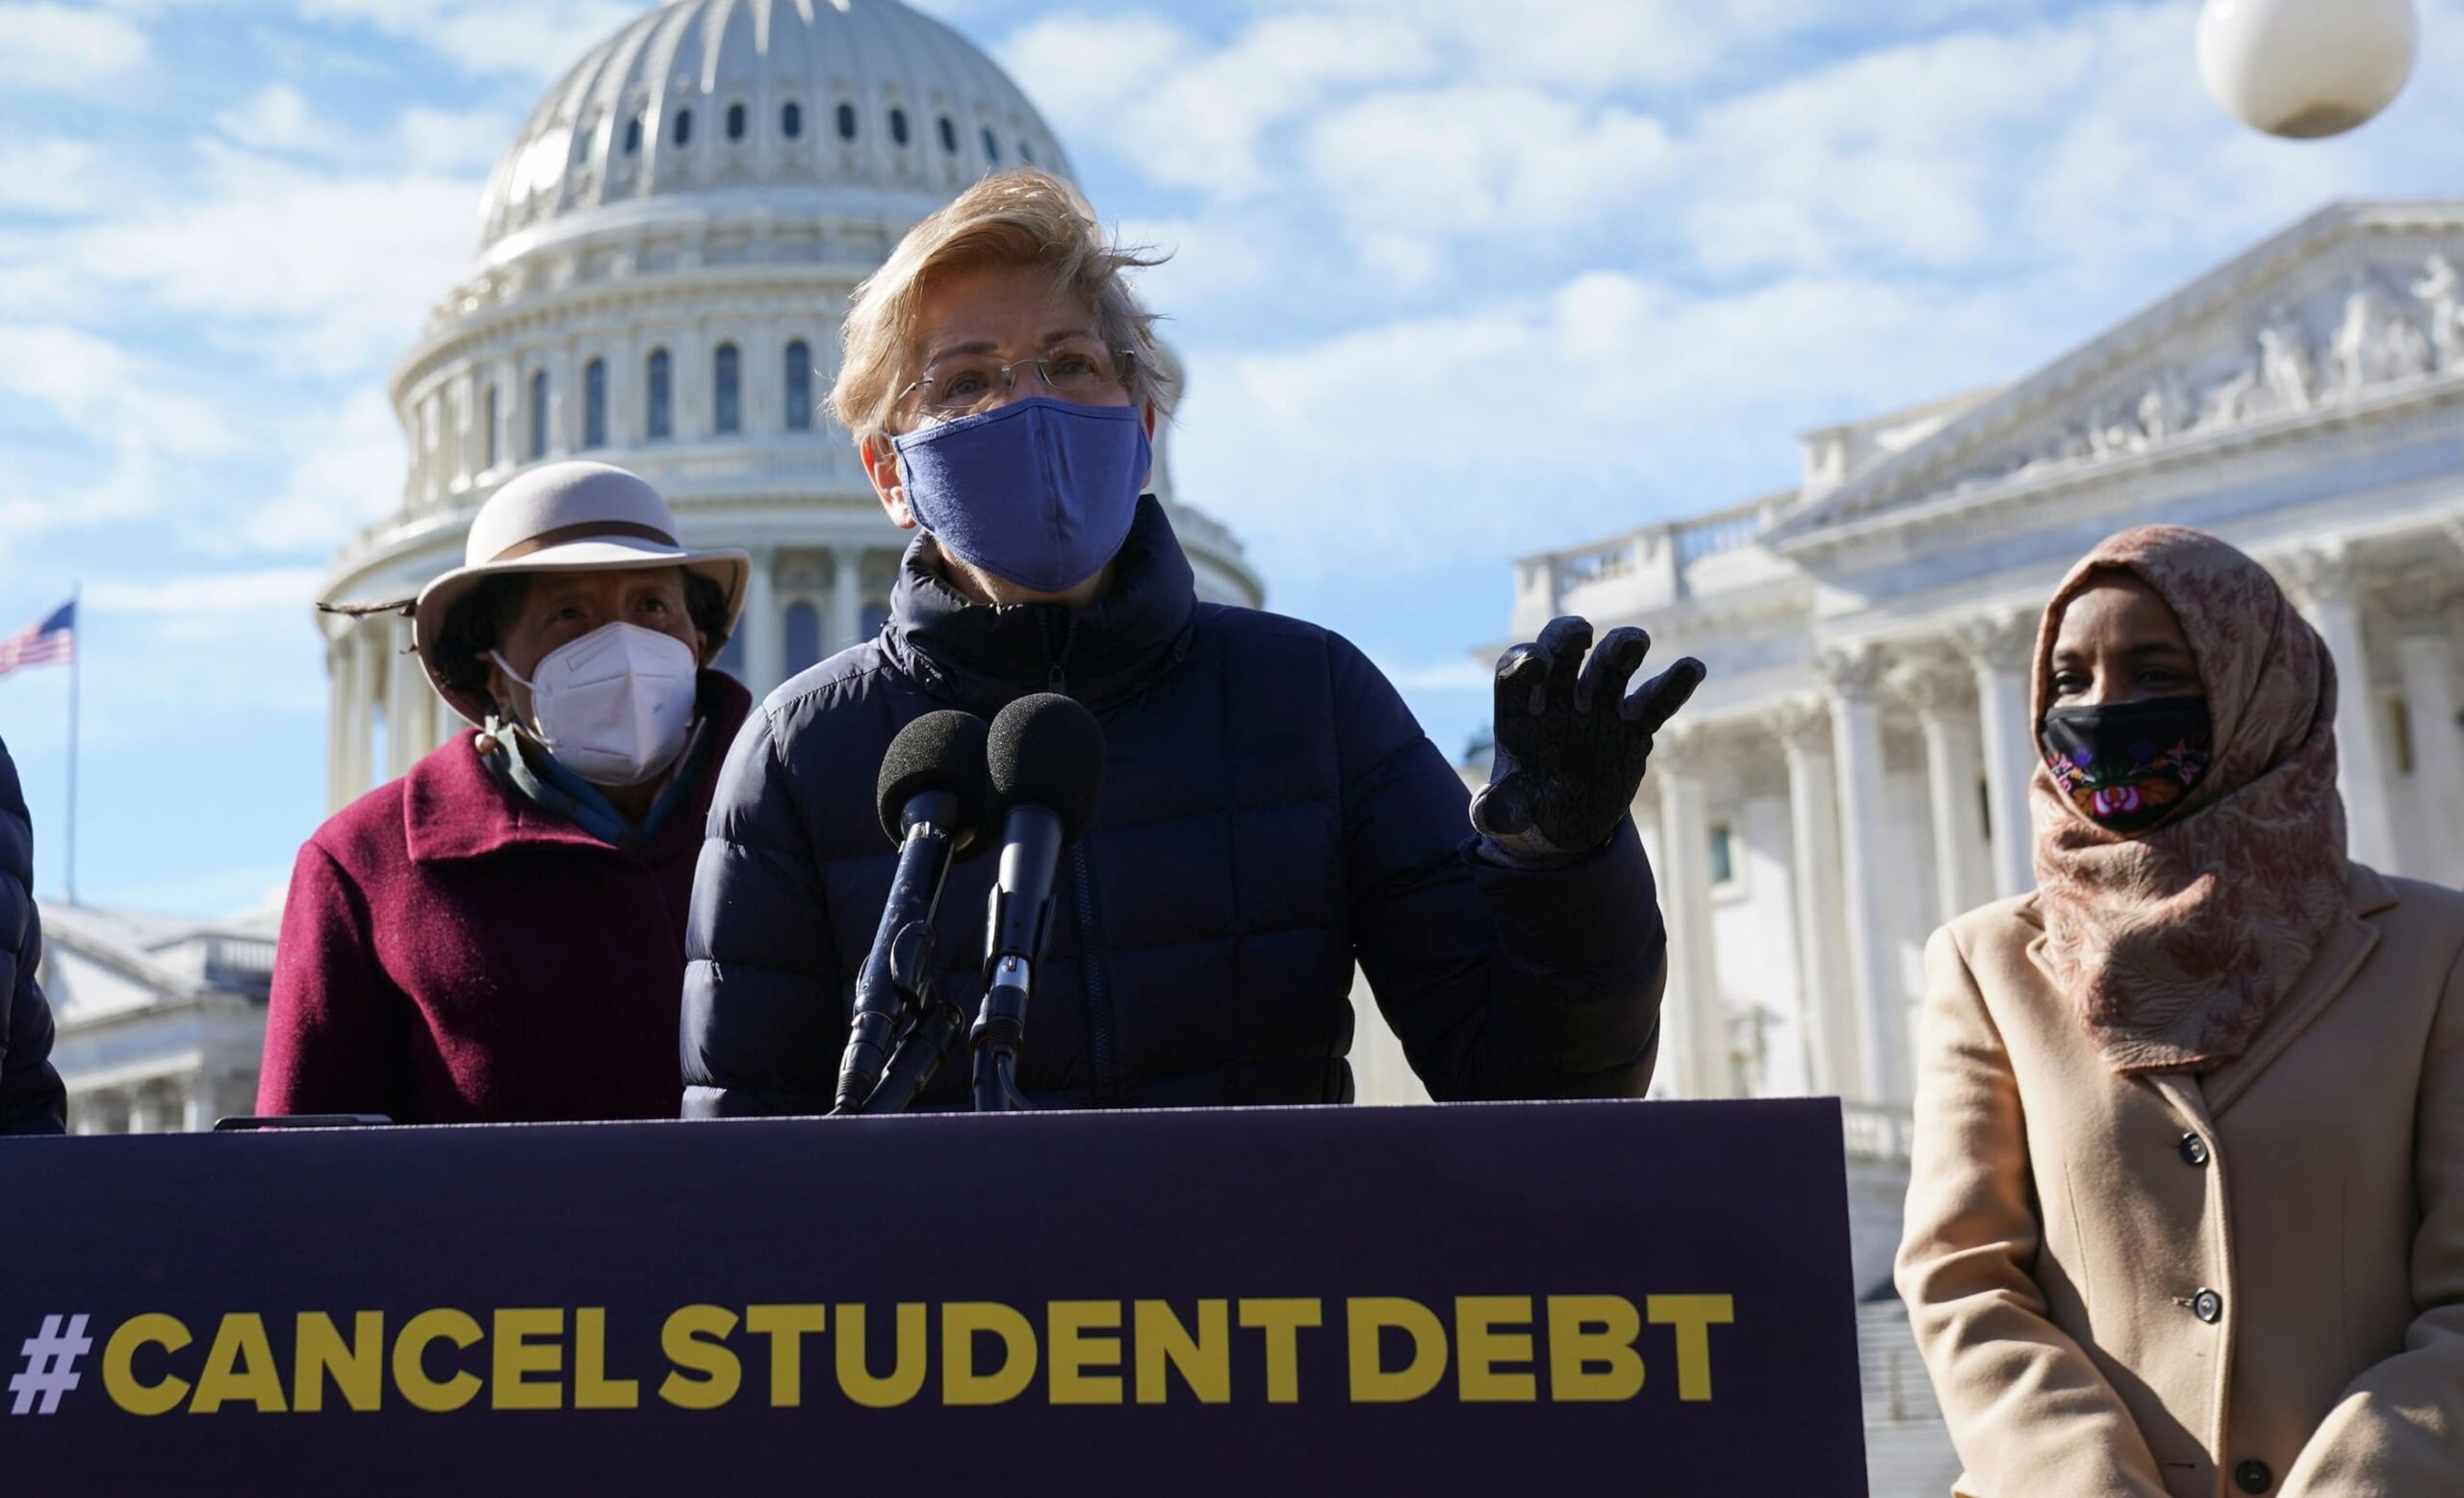 What President Biden and lawmakers can do to fix the student debt crisis